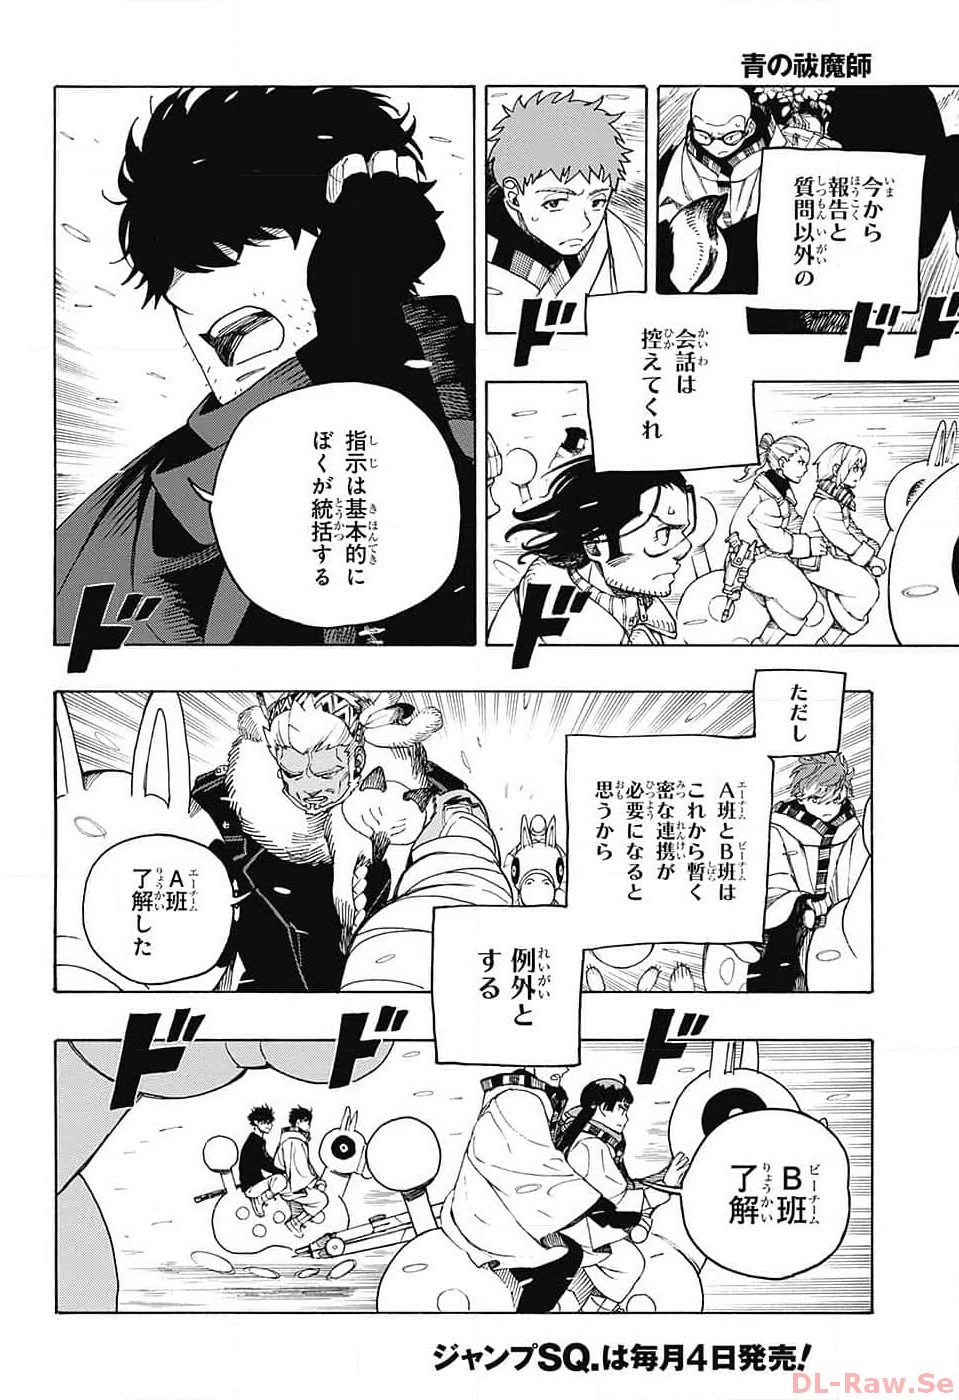 Ao no Exorcist - Chapter 146 - Page 2